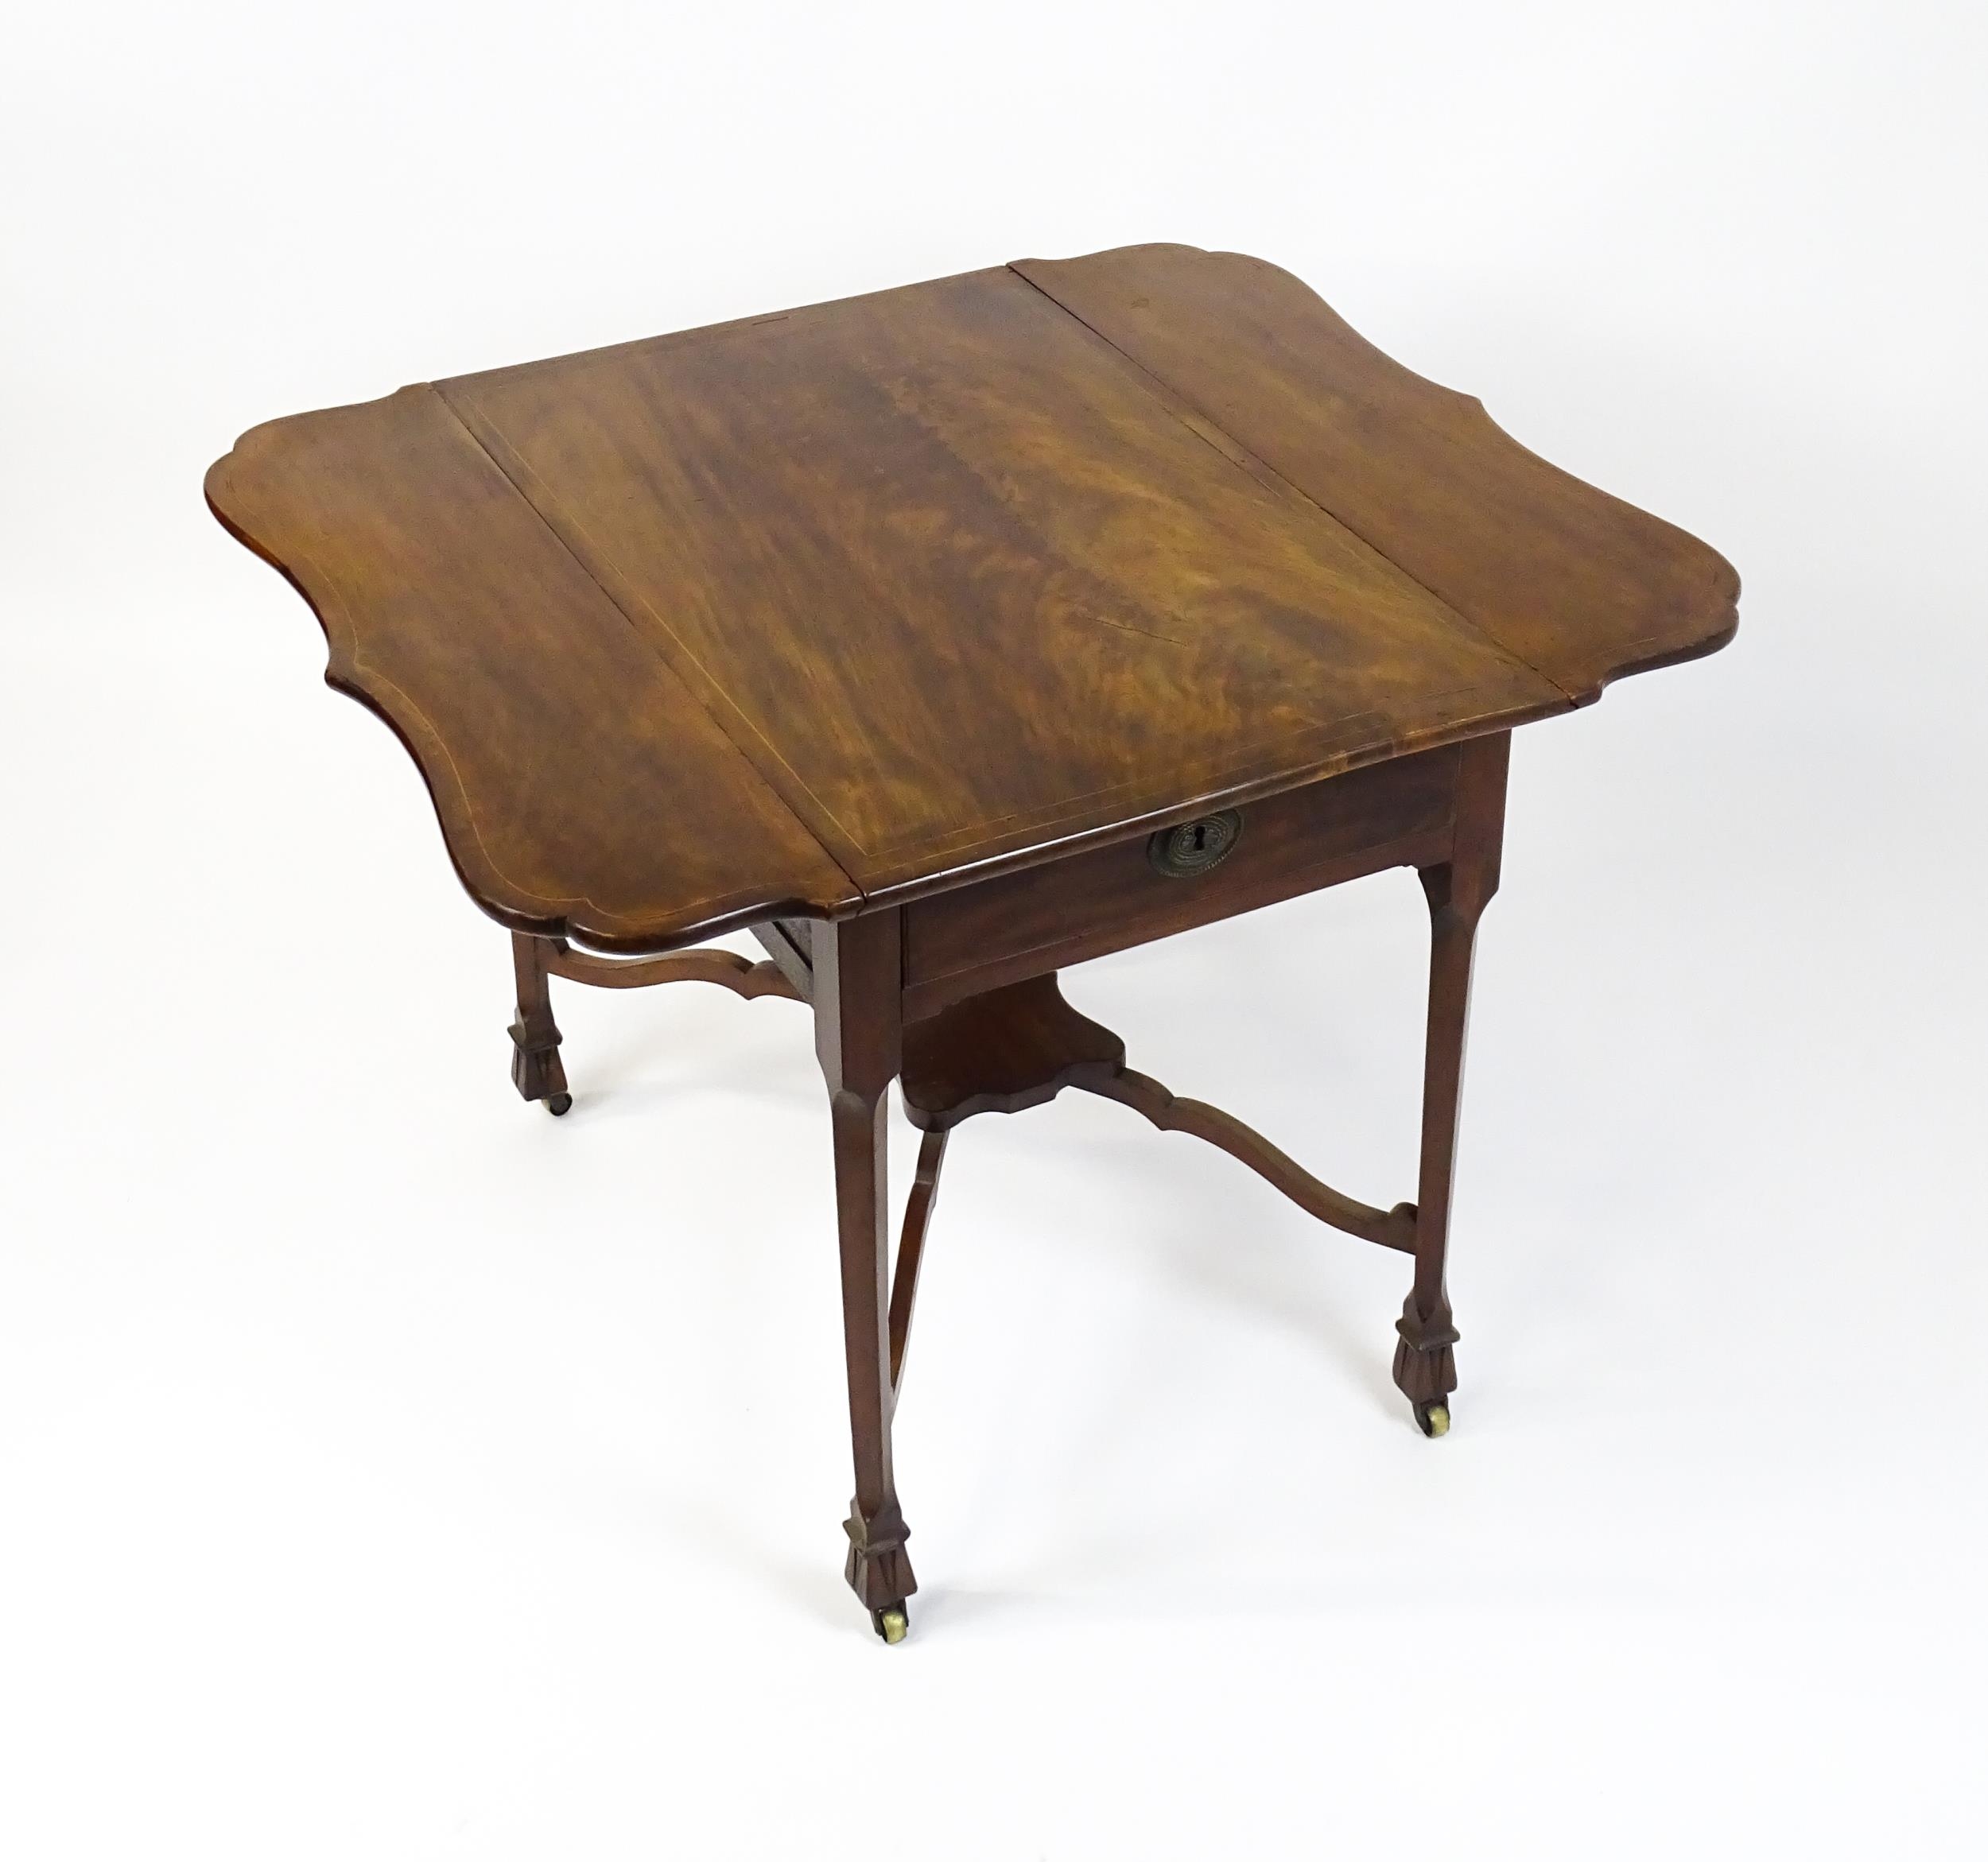 A late 18thC Chippendale style mahogany Pembroke table, the butterfly table top having two shaped